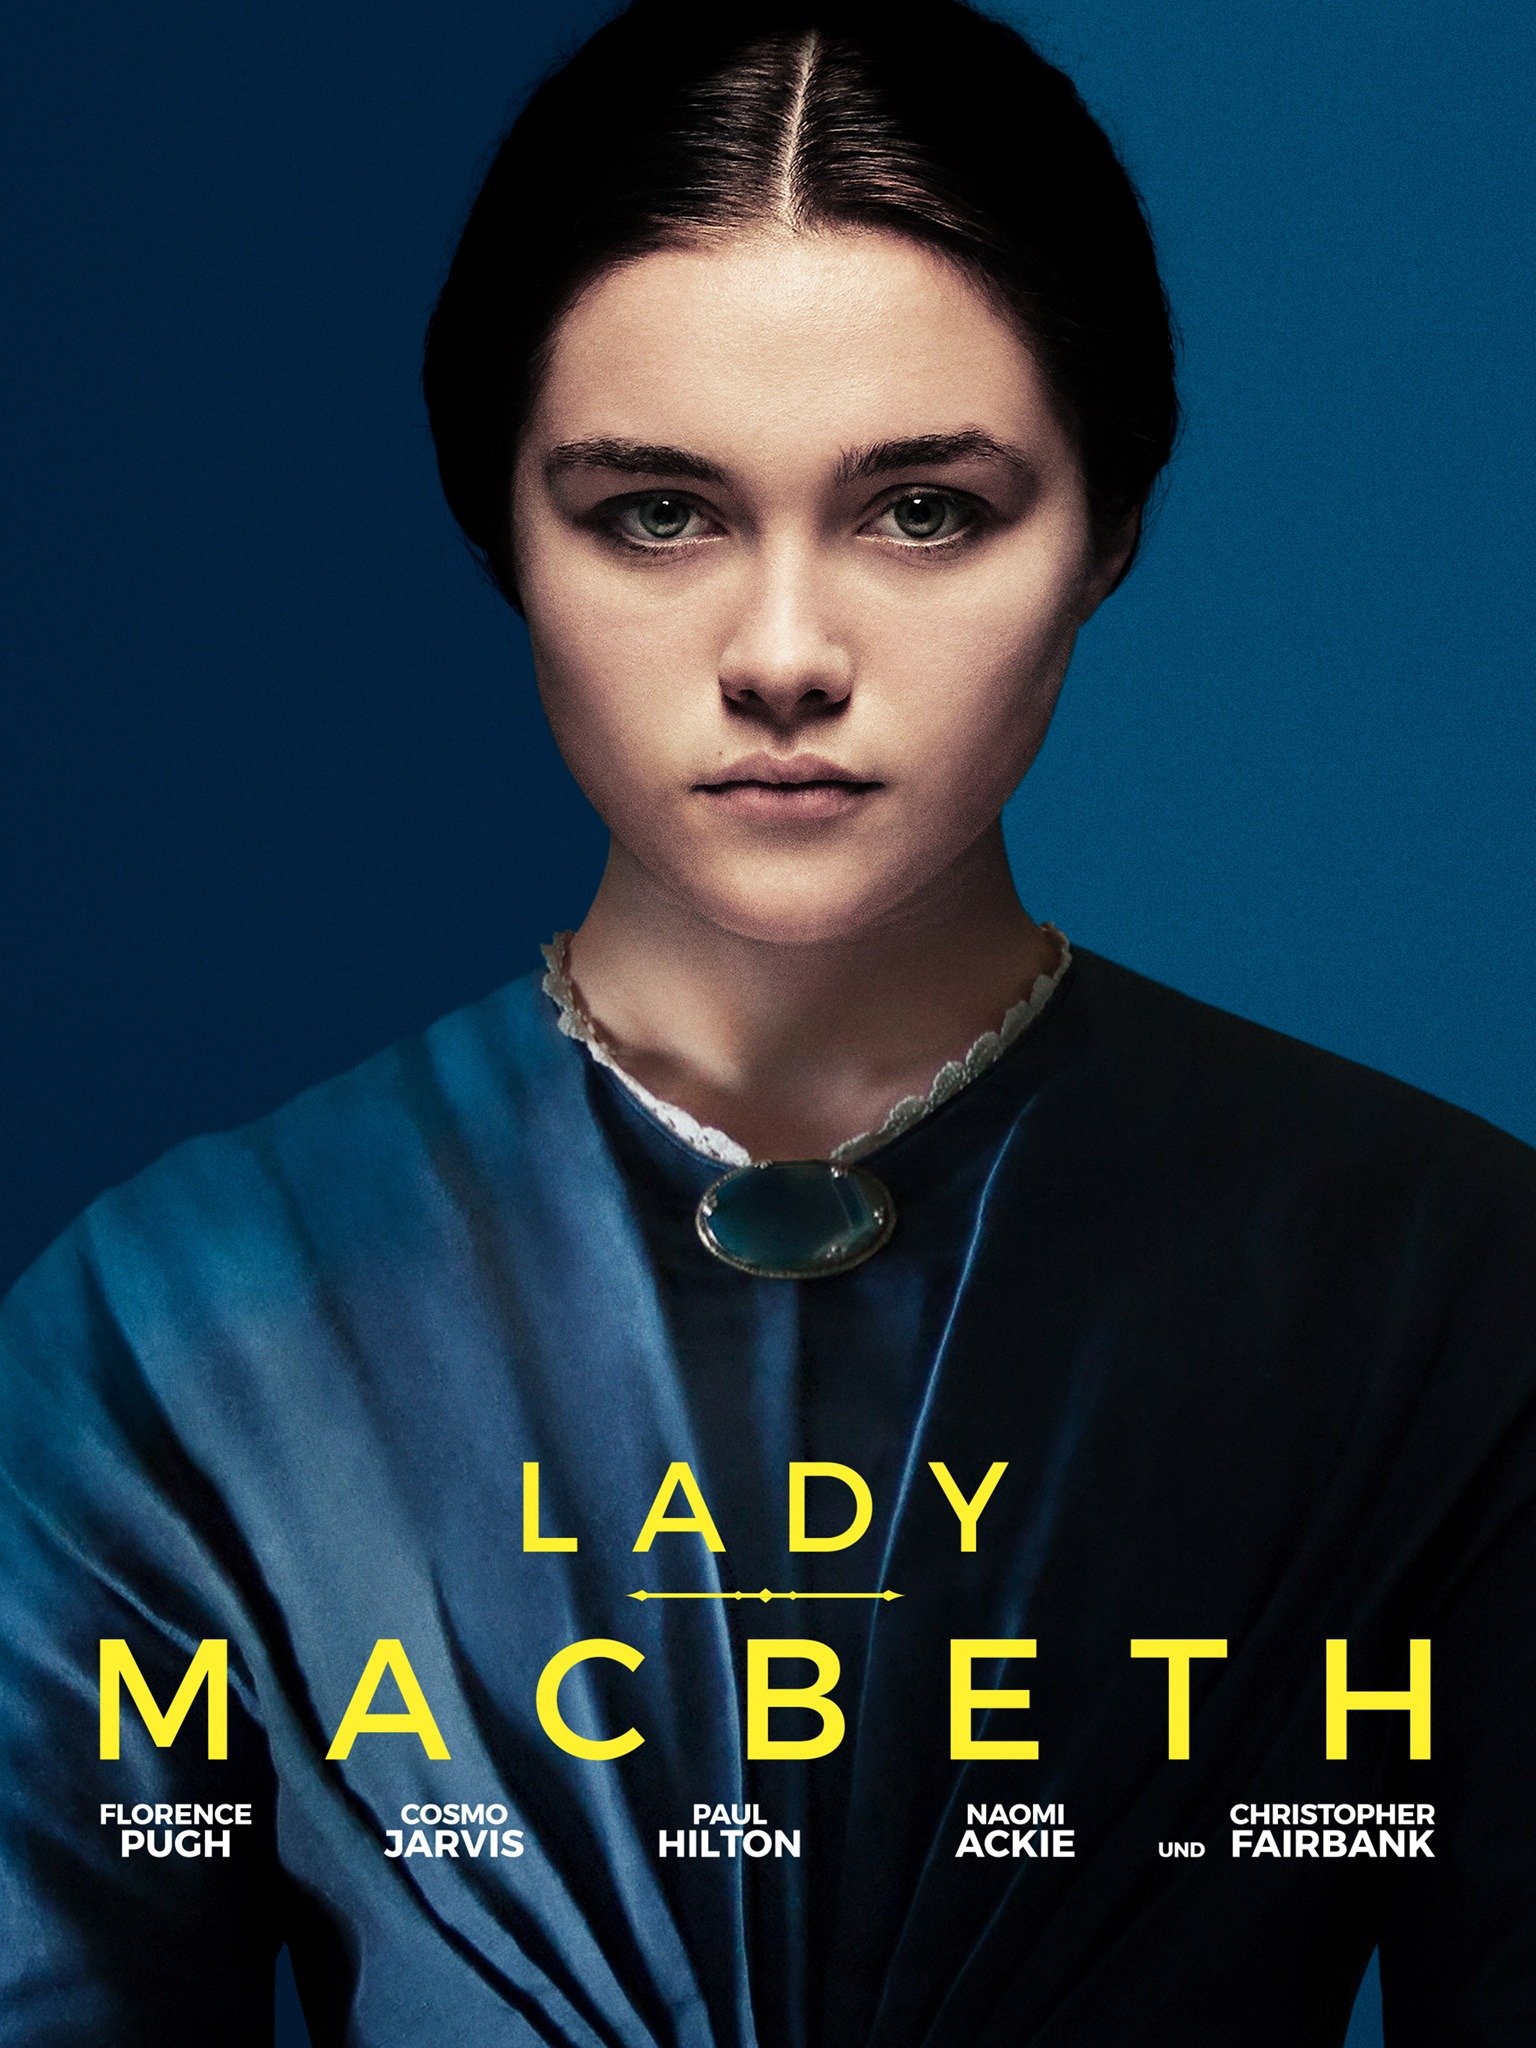 Lady Macbeth Us Release Trailer 1 Trailers And Videos Rotten Tomatoes